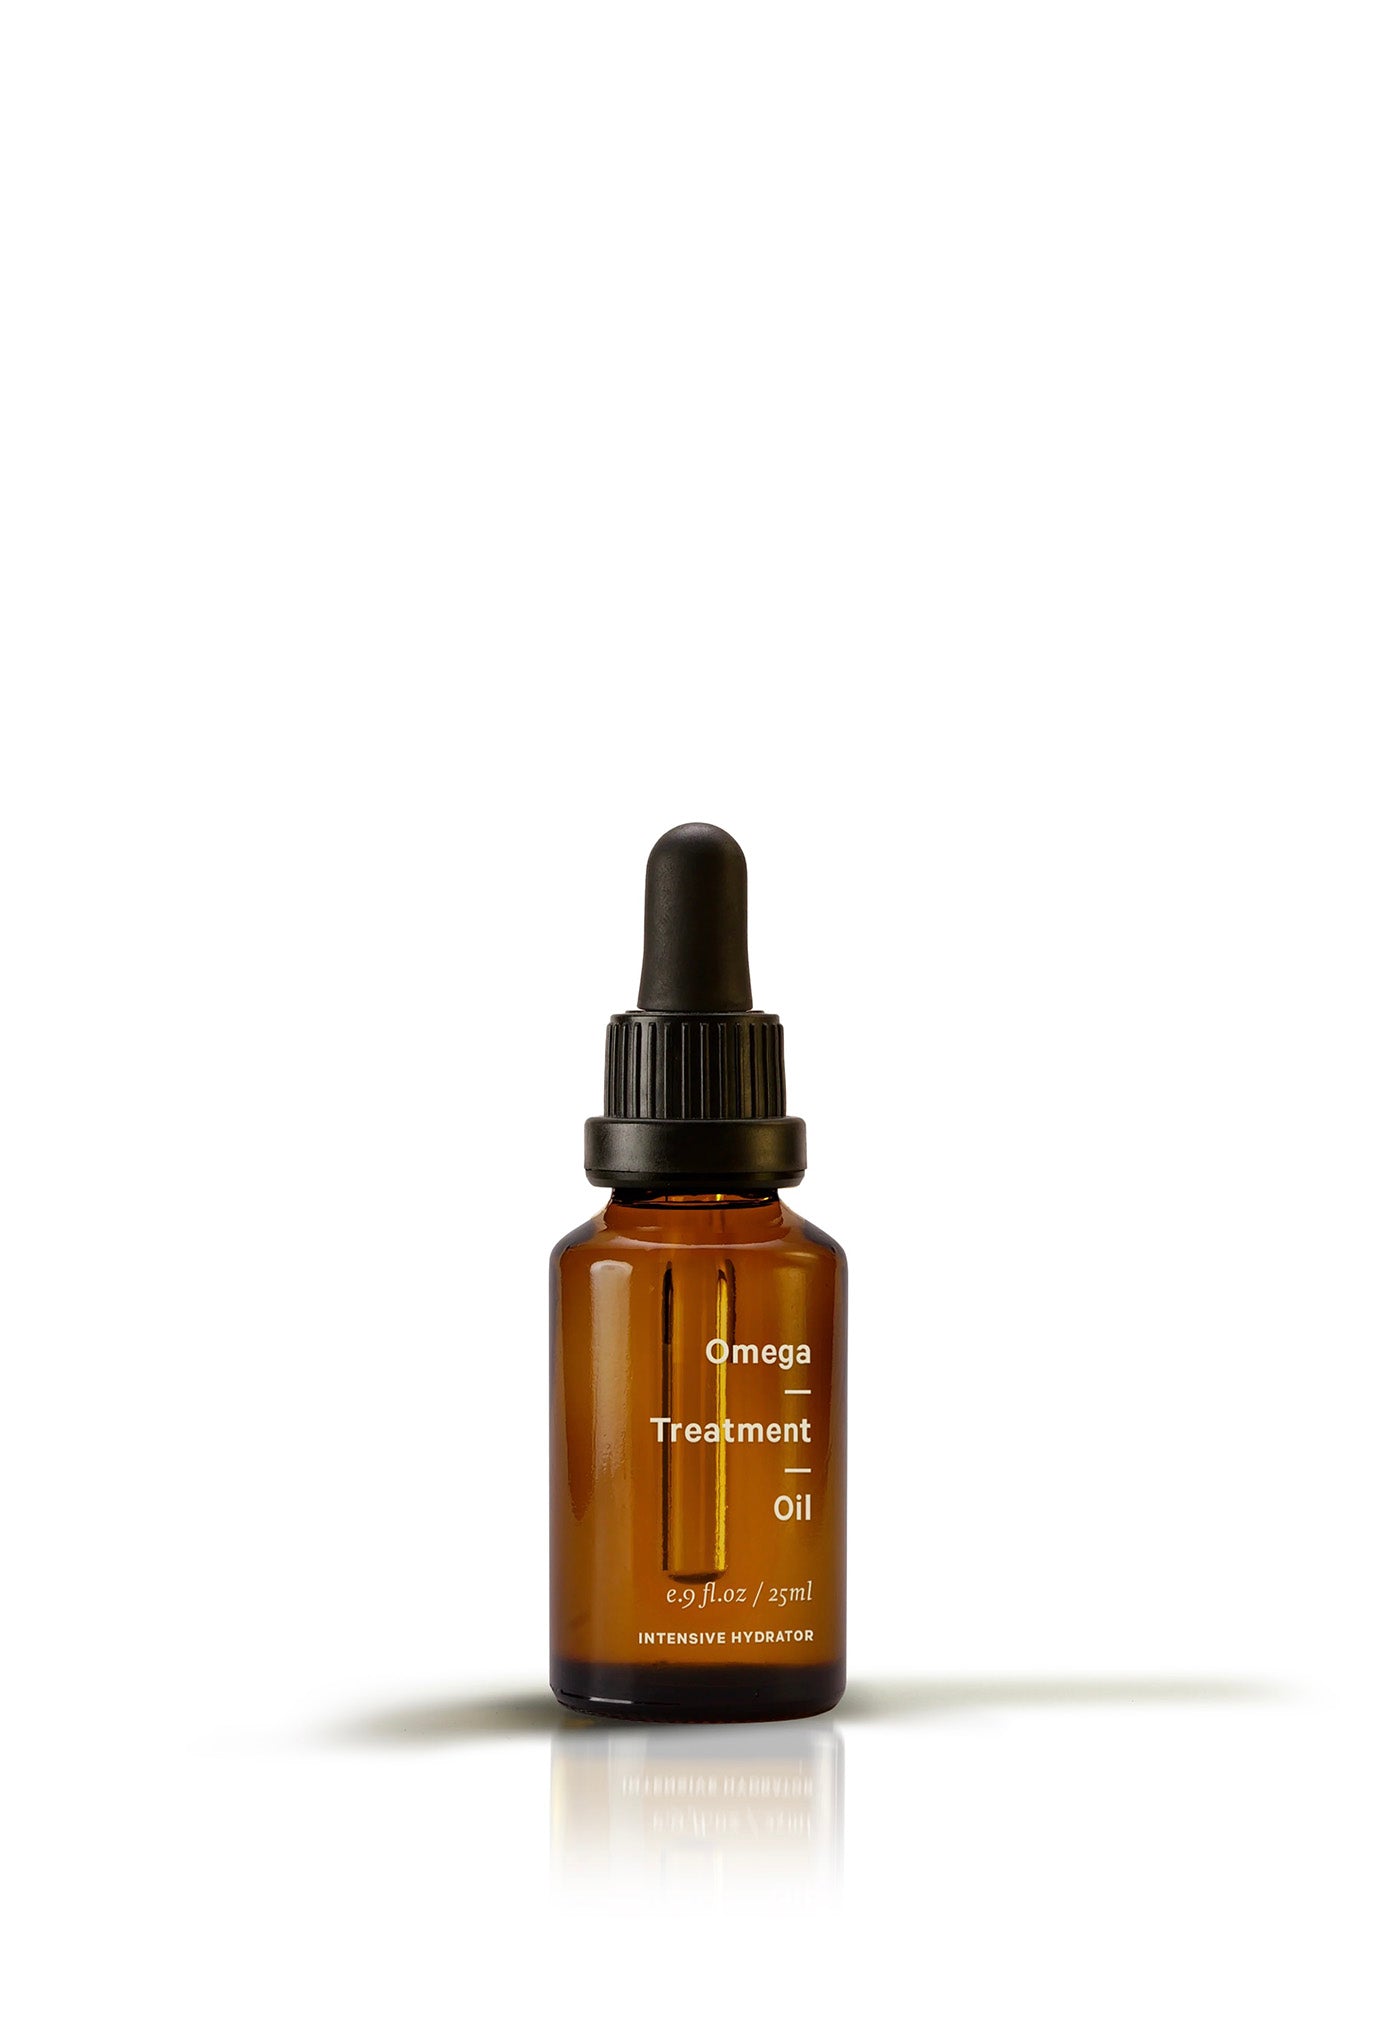 Omega Treatment Oil sold by Angel Divine